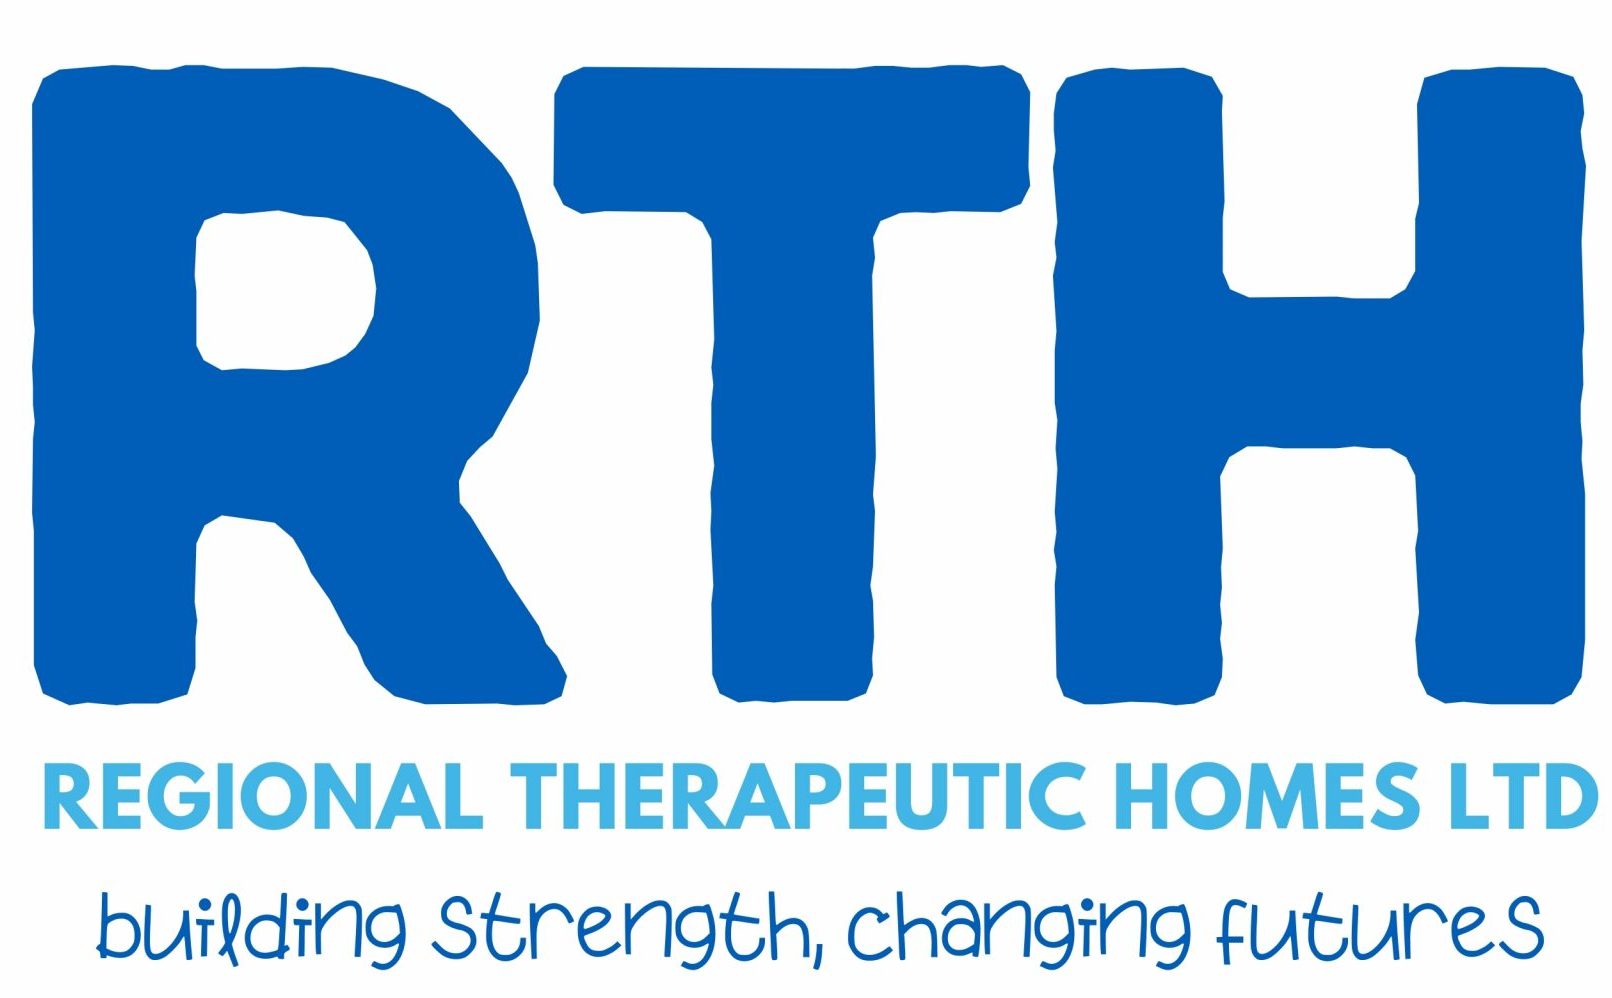 Regional Therapeutic Homes